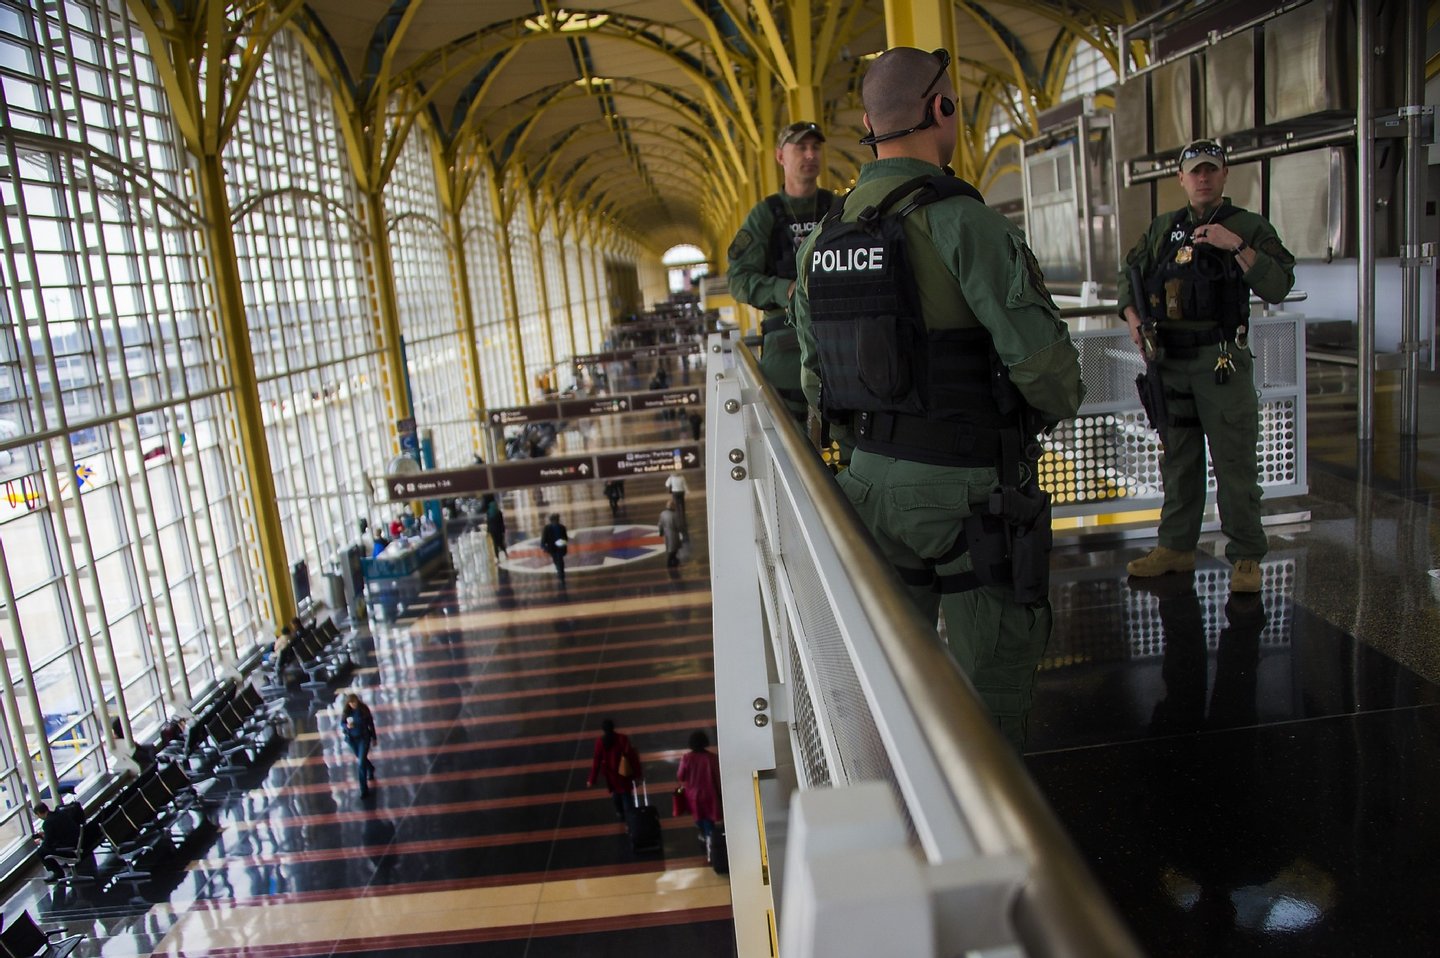 Heavily armed police patrol Ronald Reagan Washington National Airport in Arlington, Virginia, March 22, 2016. New York and Washington stepped up security in the wake of the attacks in Brussels on March 22, deploying counter-terrorism reinforcements and the National Guard to airports and stations, officials said. / AFP / Jim Watson (Photo credit should read JIM WATSON/AFP/Getty Images)